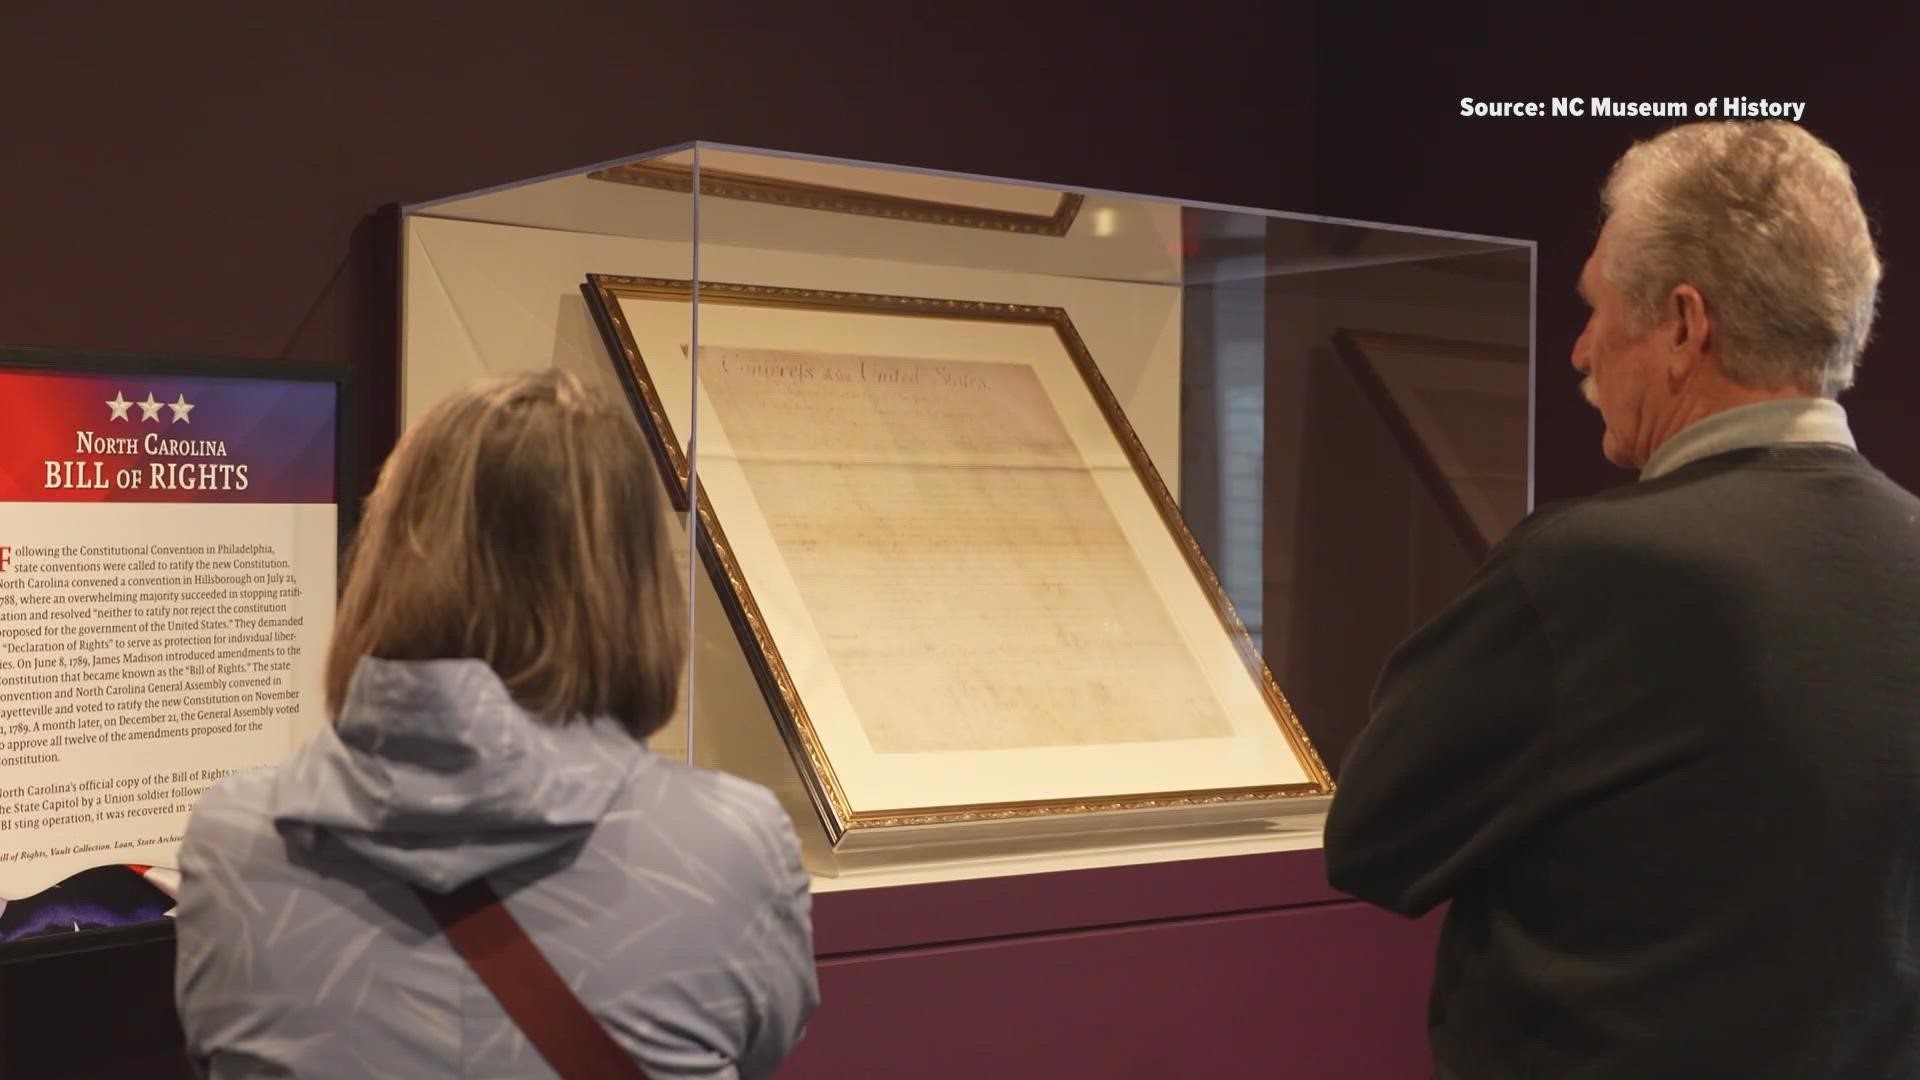 The North Carolina Museum of History held a special one-day public exhibition showcasing the first printing of the U.S. Constitution.